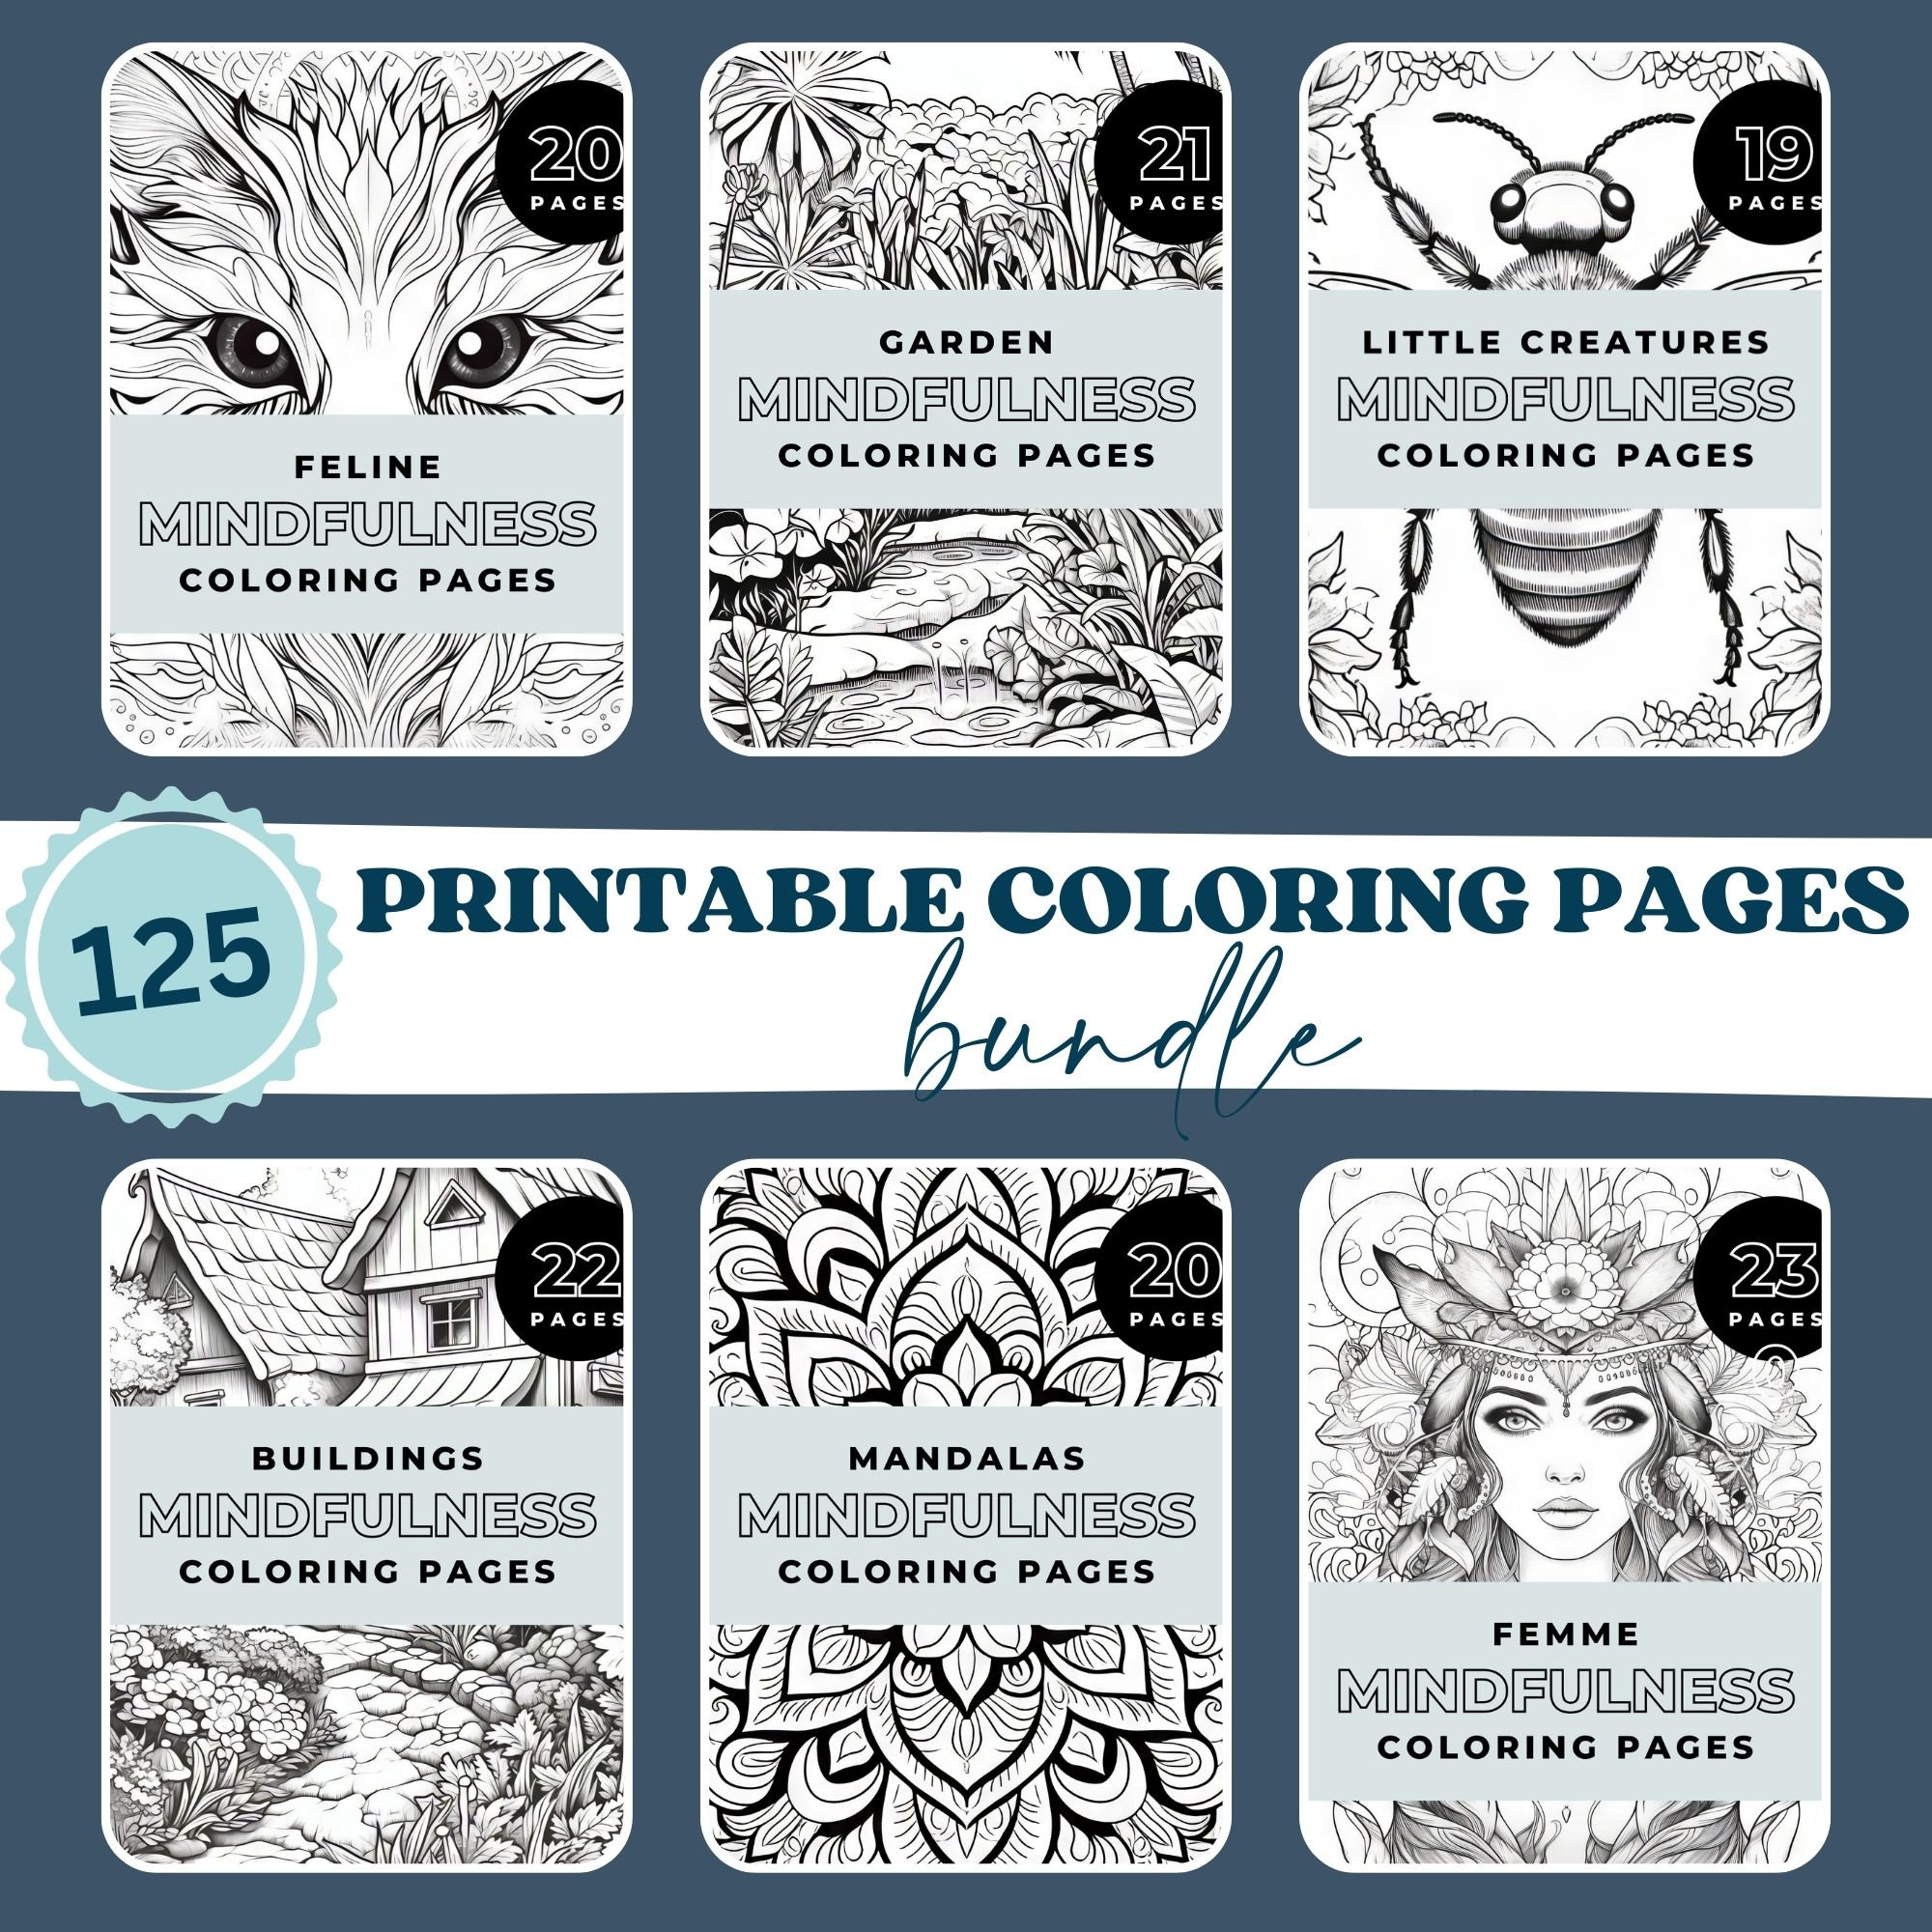 Nature-Inspired Mindfulness Coloring Book for Adult: with 50 Landscape  nature coloring pages, adult coloring books for anxiety and depression